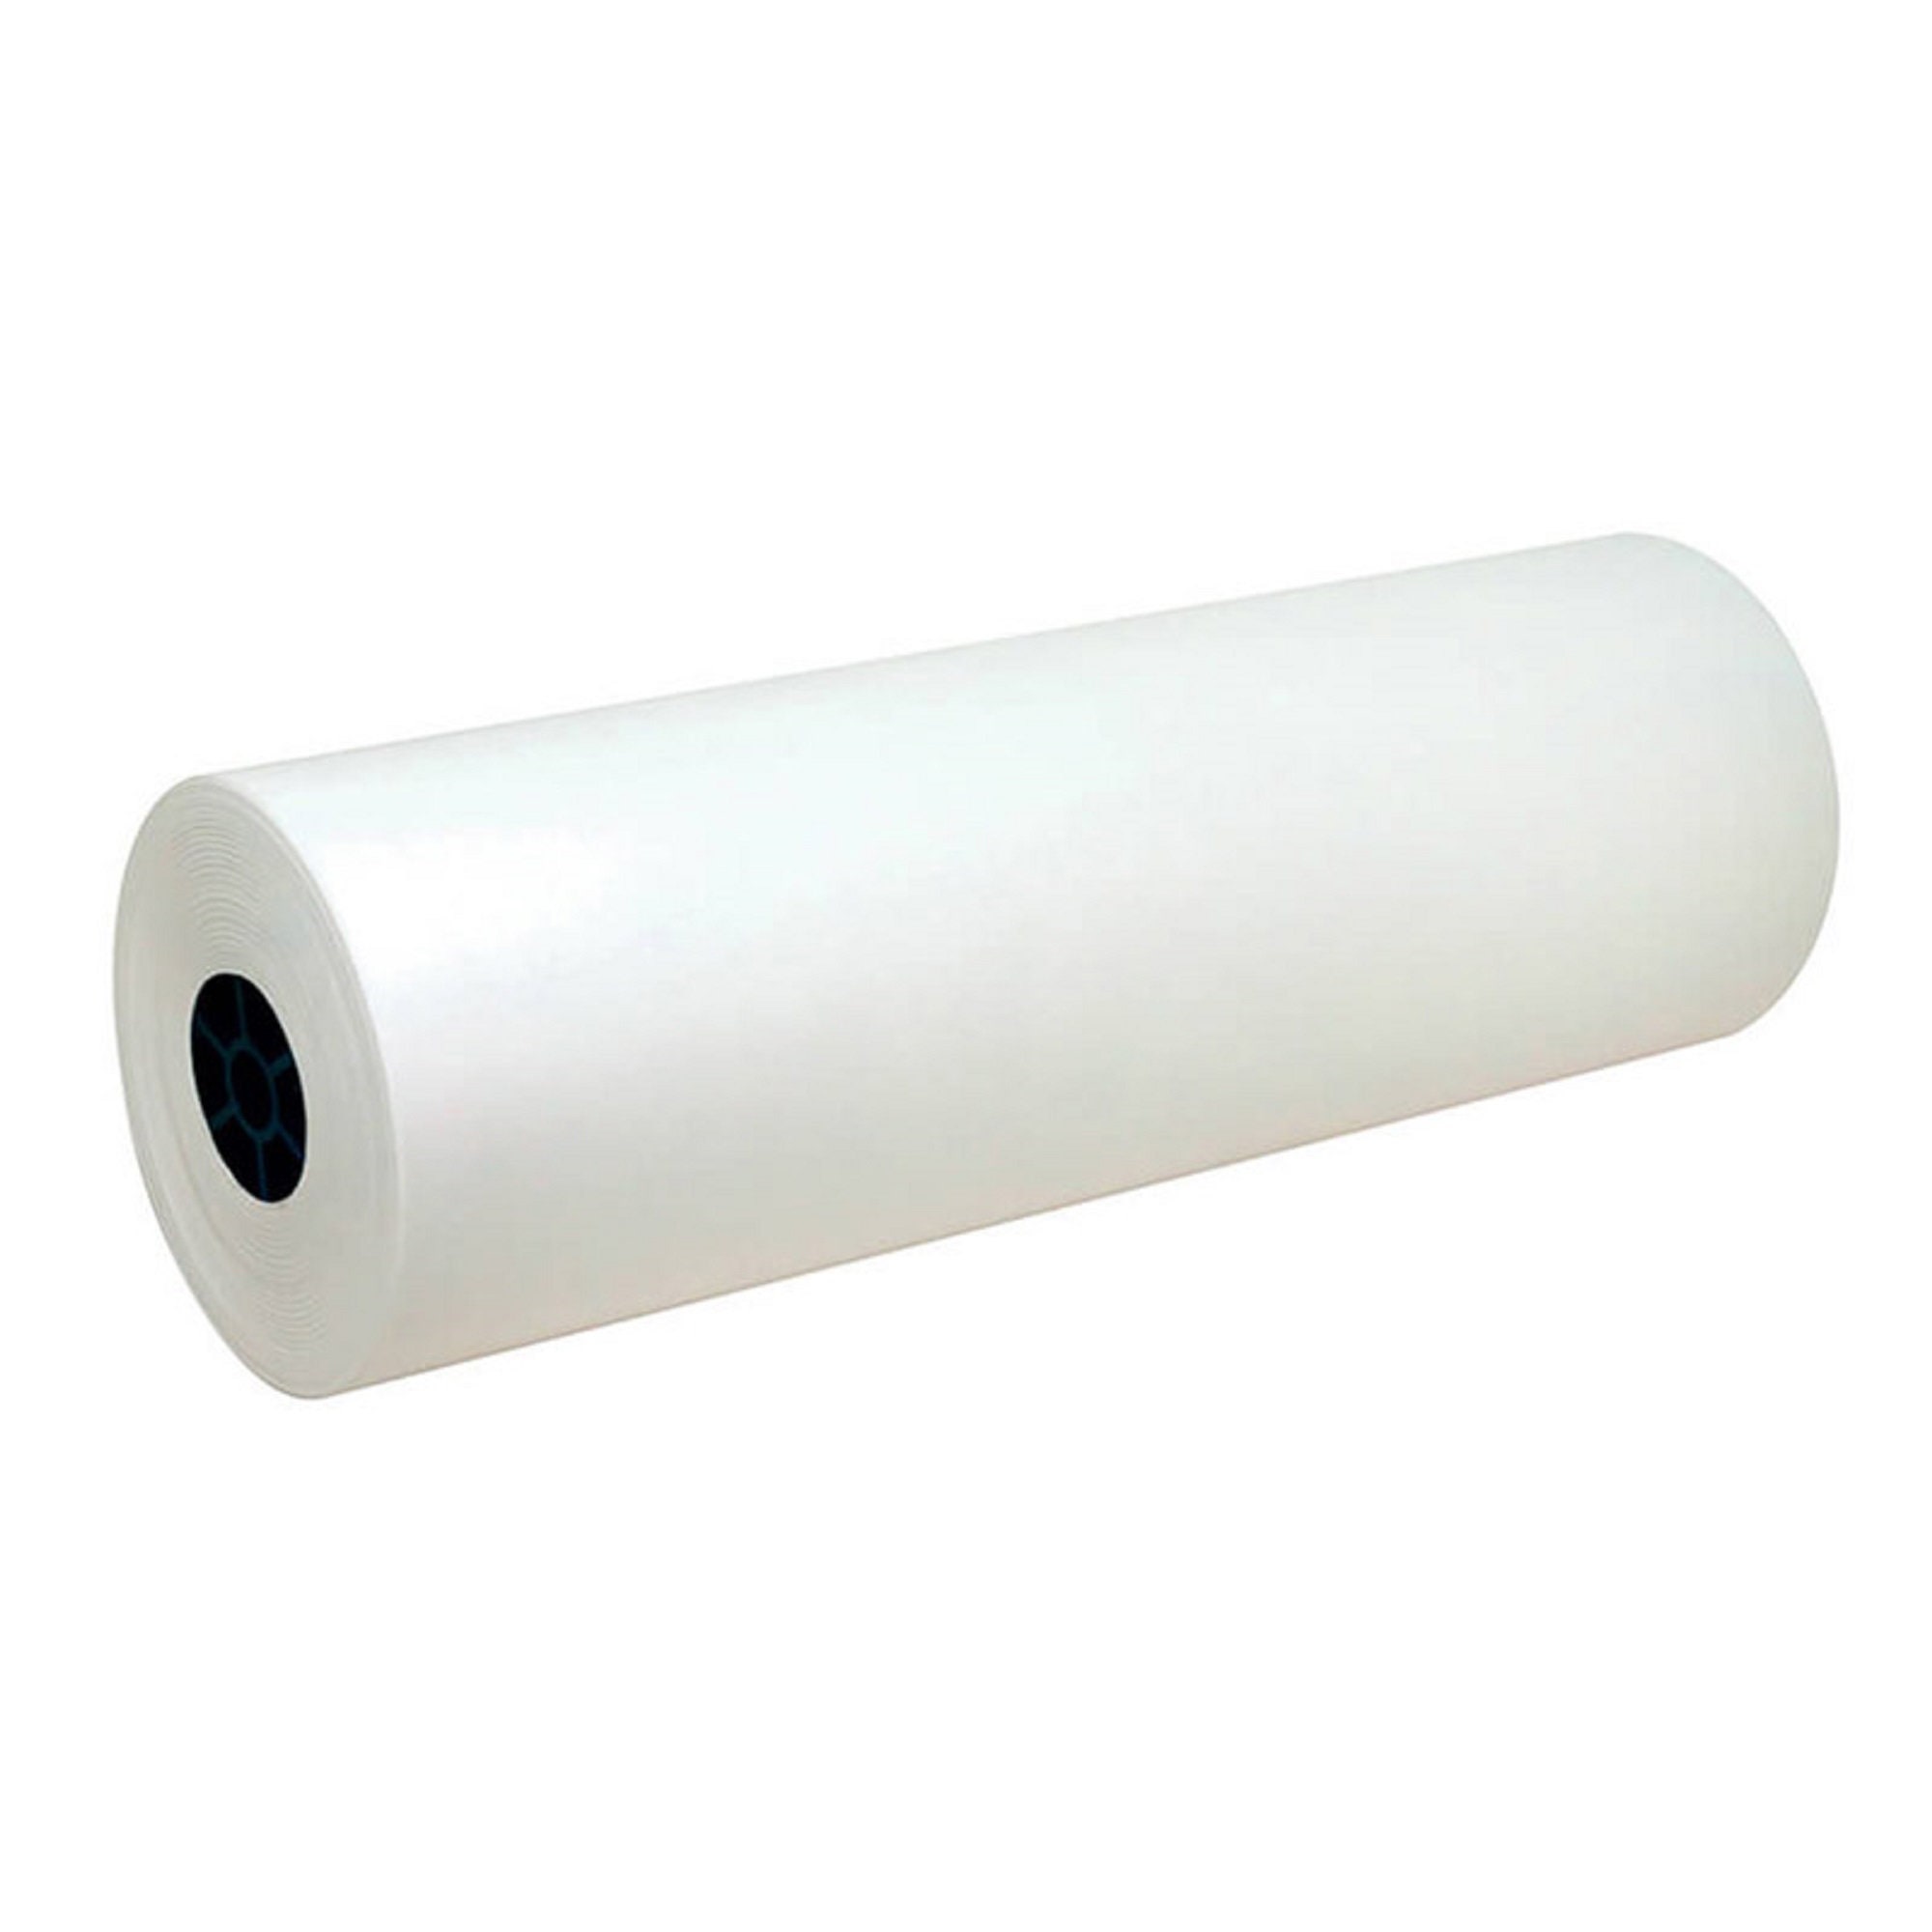 Kraft Paper Roll 17400, White Wrapping Paper, Craft Paper